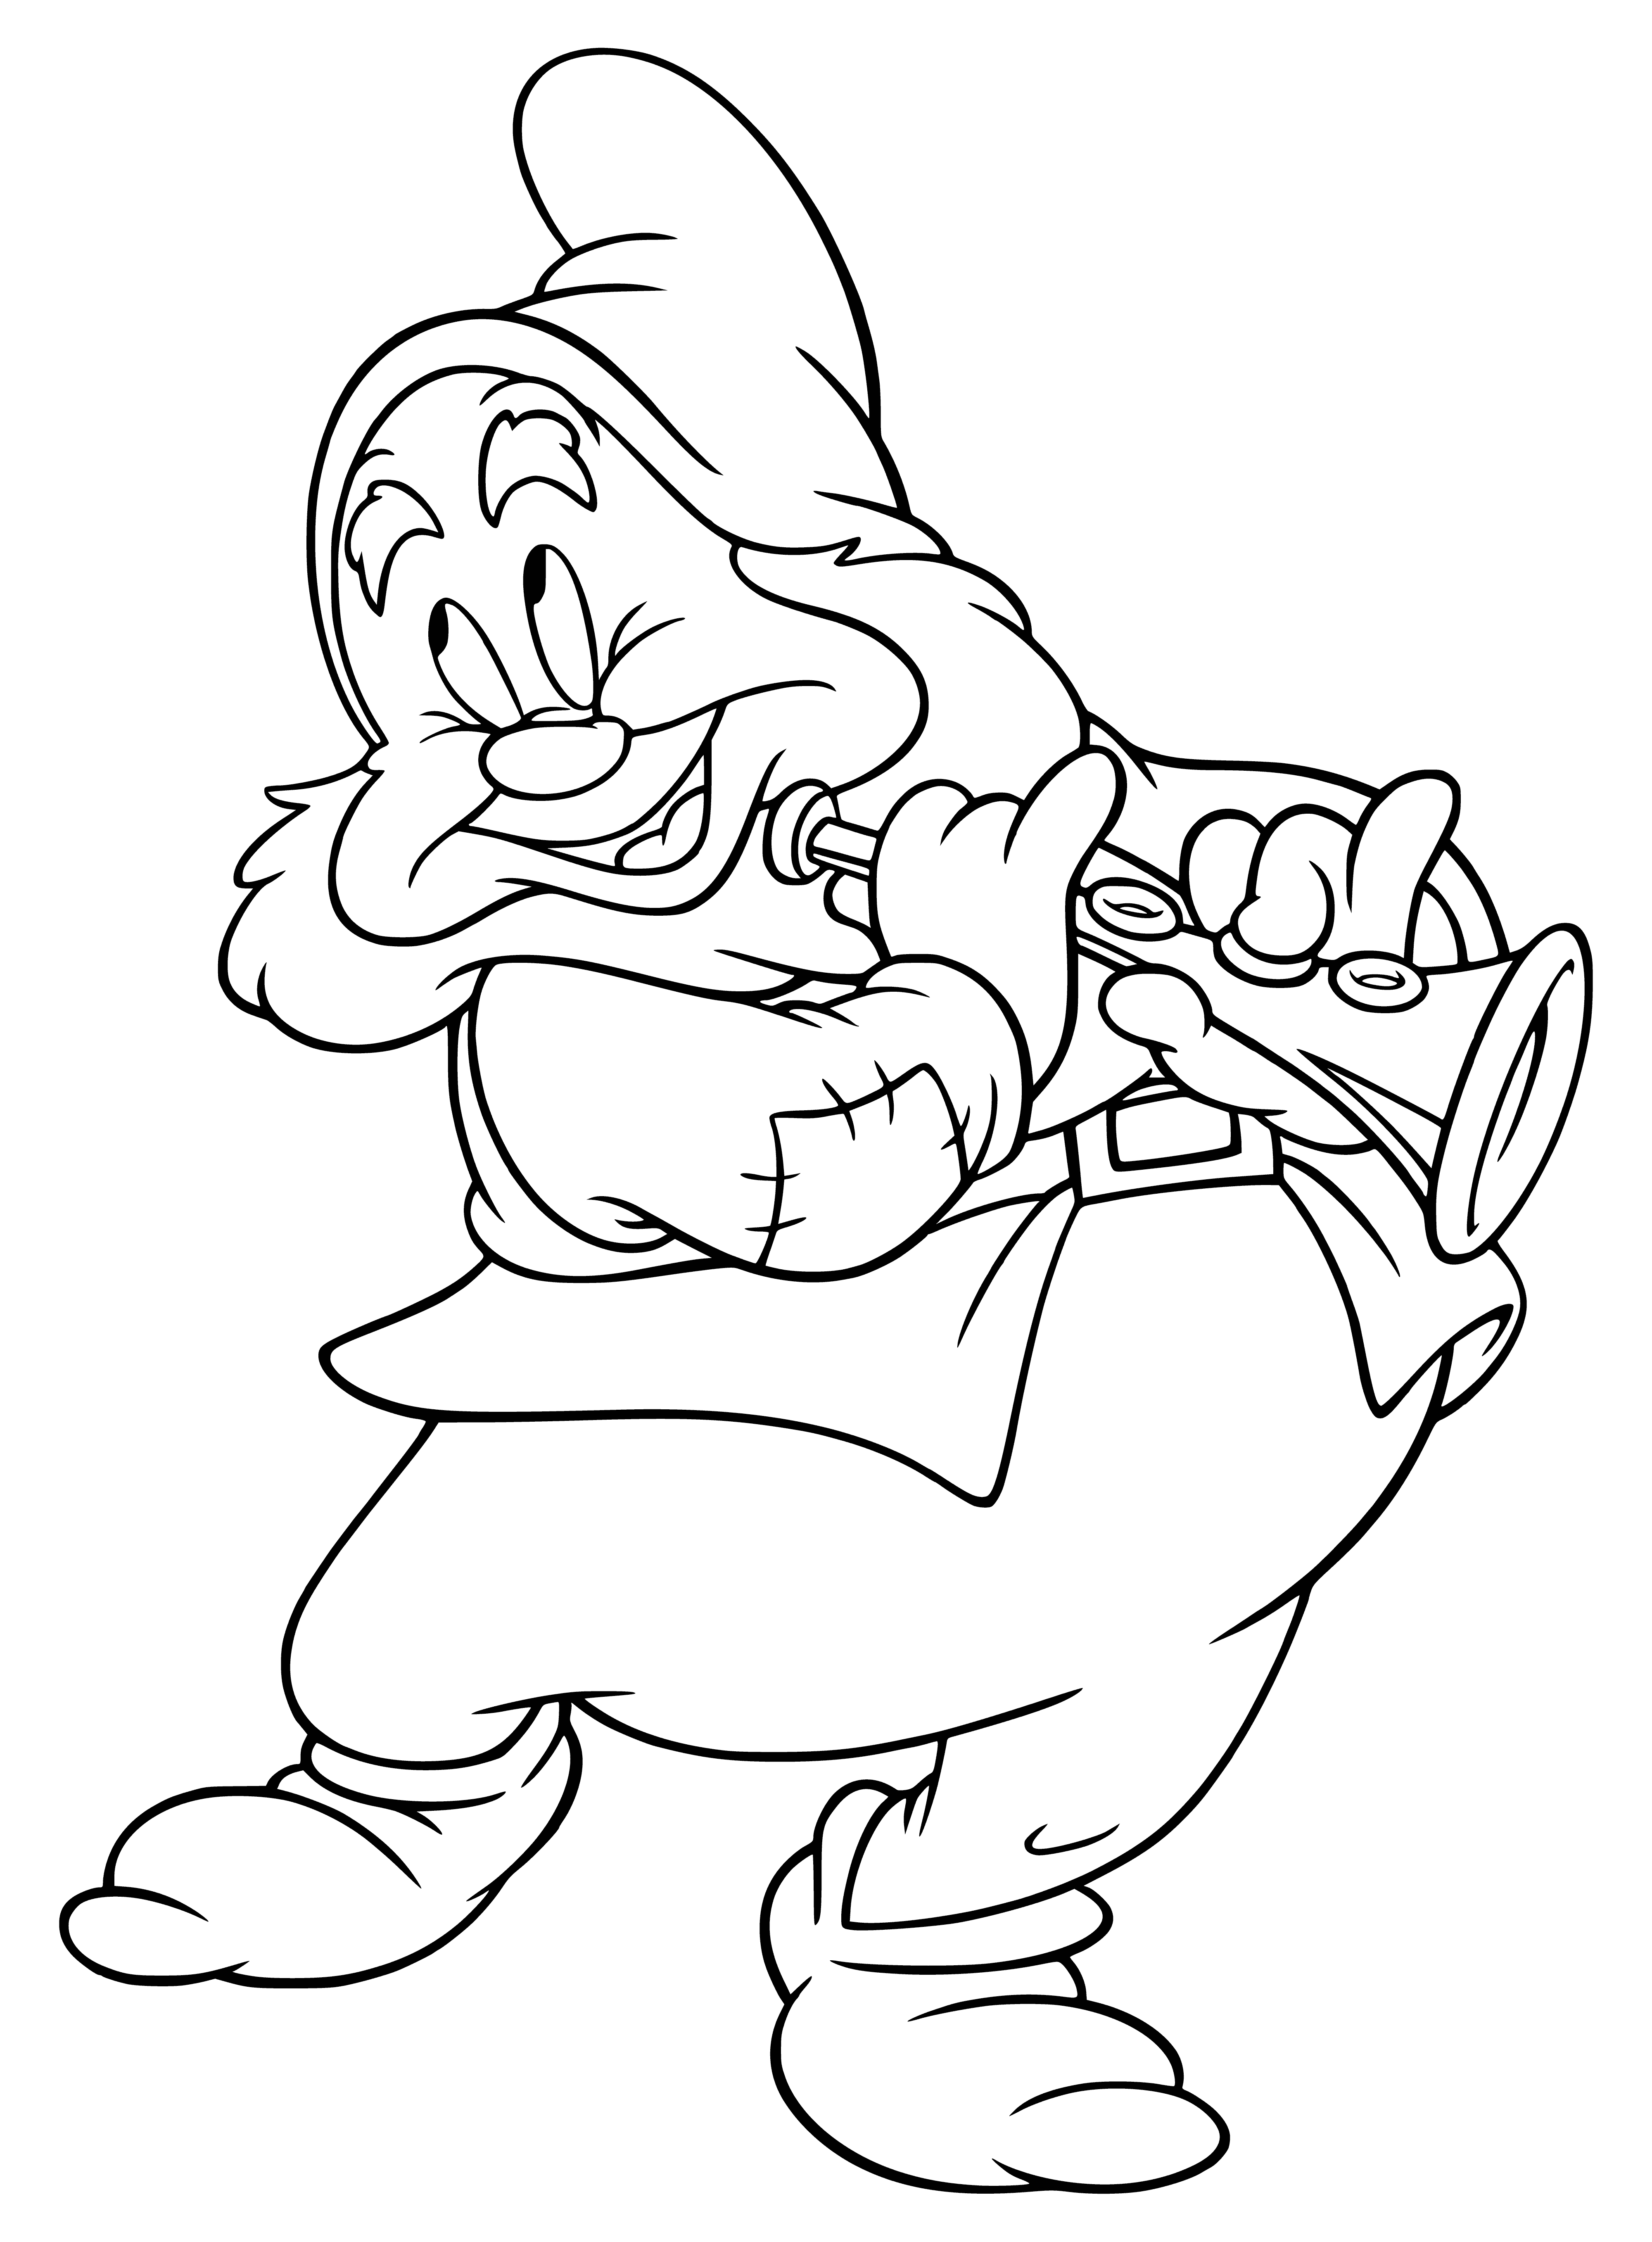 Gnome Merry coloring page